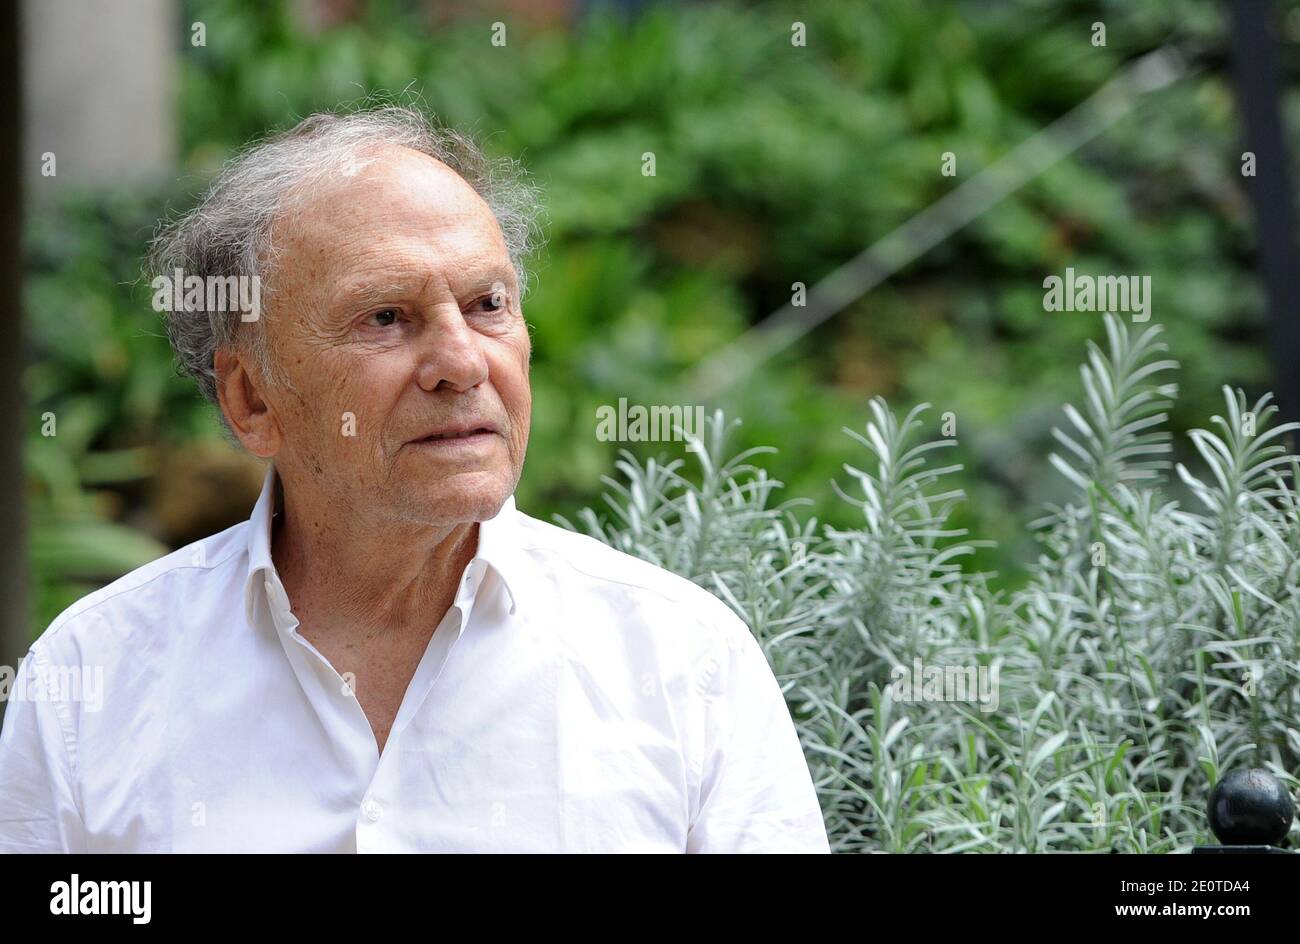 French actor Jean-Louis Trintignant poses during a photocall for the  presentation of the the film 'Amour' on October 9, 2012 in Rome, Italy.  This movie won the Palme d'Or at the 2012